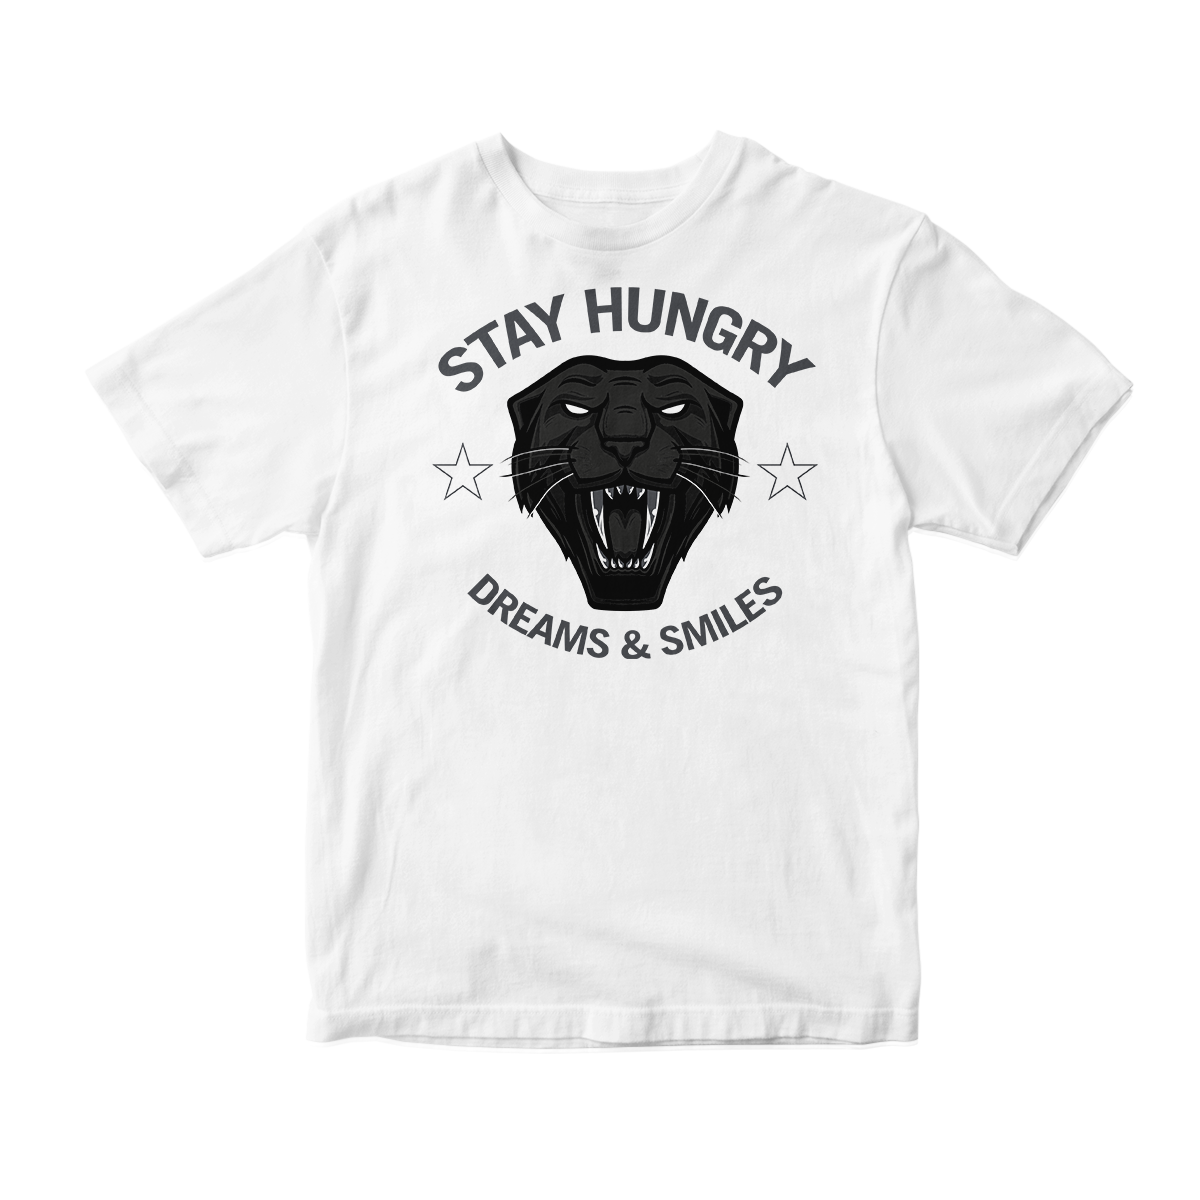 'Stay Hungry' in Black Cat CW Short Sleeve Tee